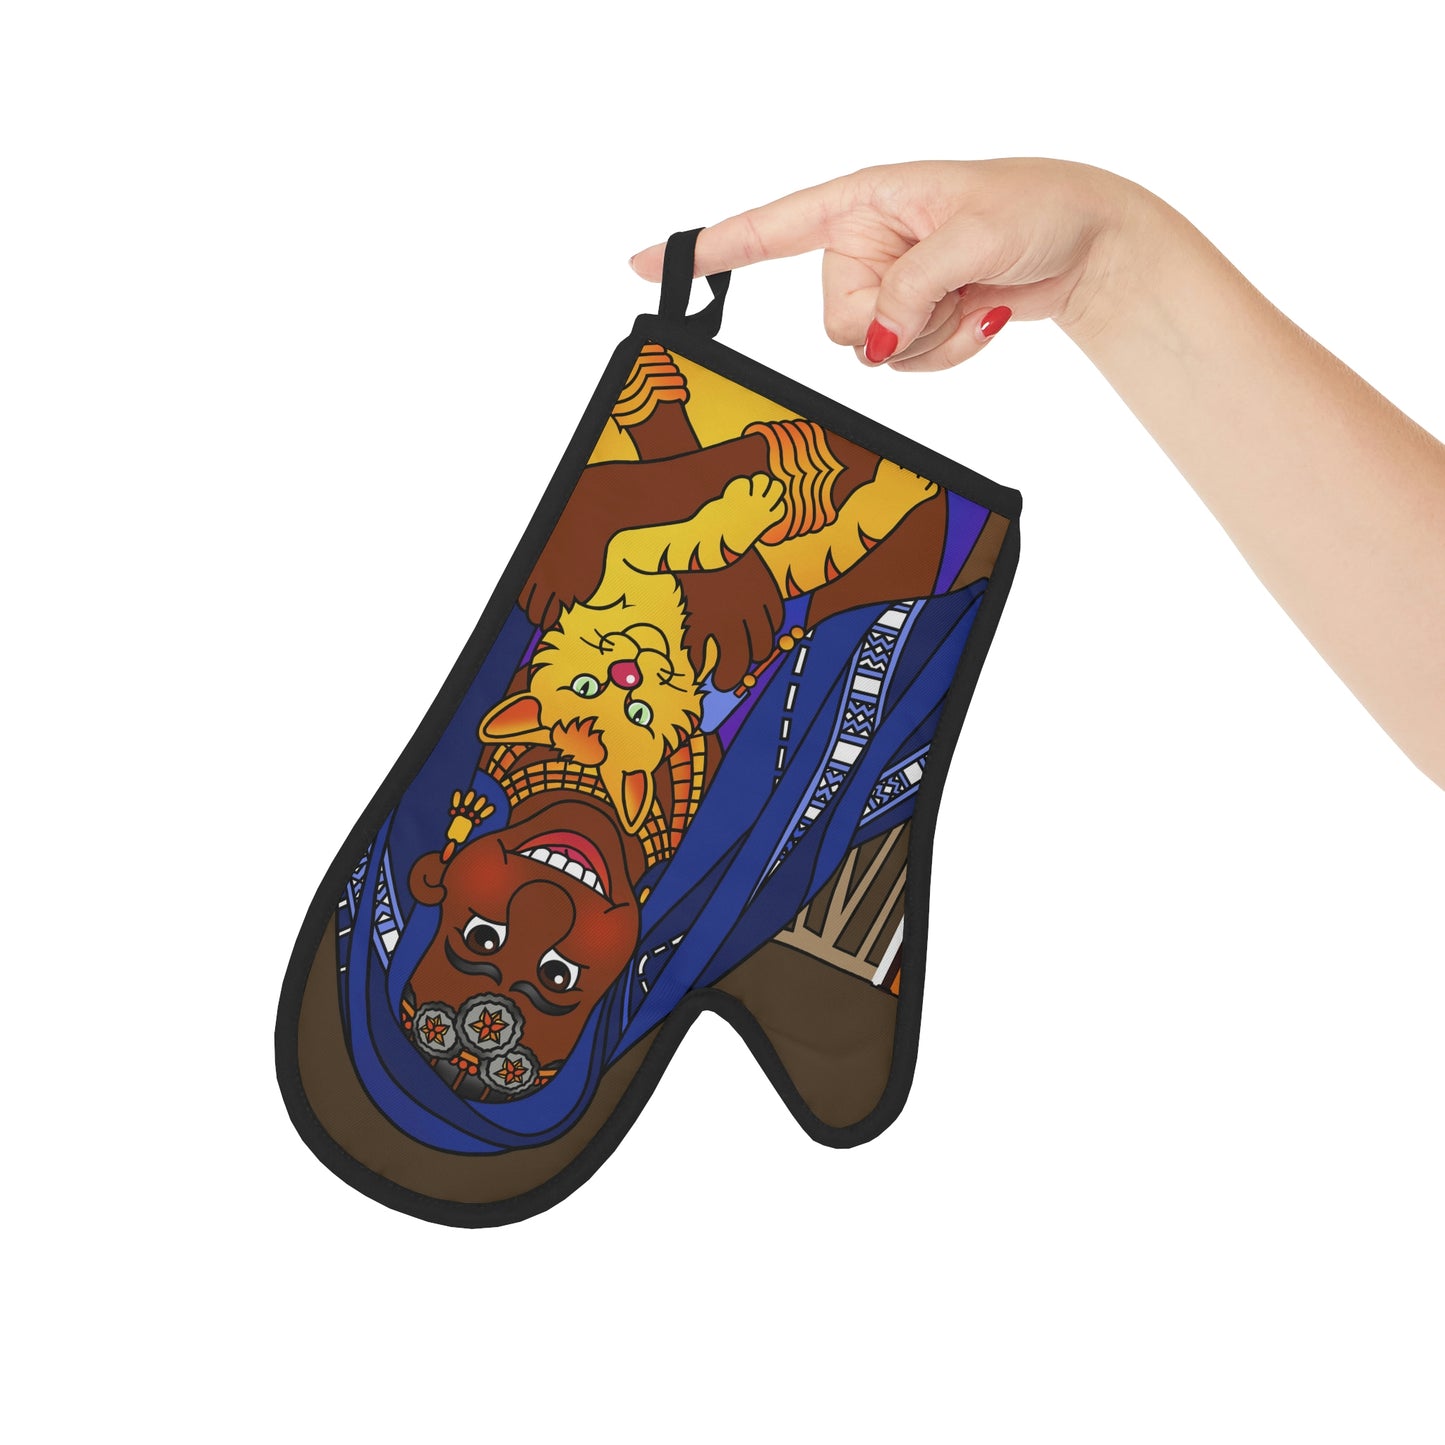 The Kitty Cat Cried Oven Glove